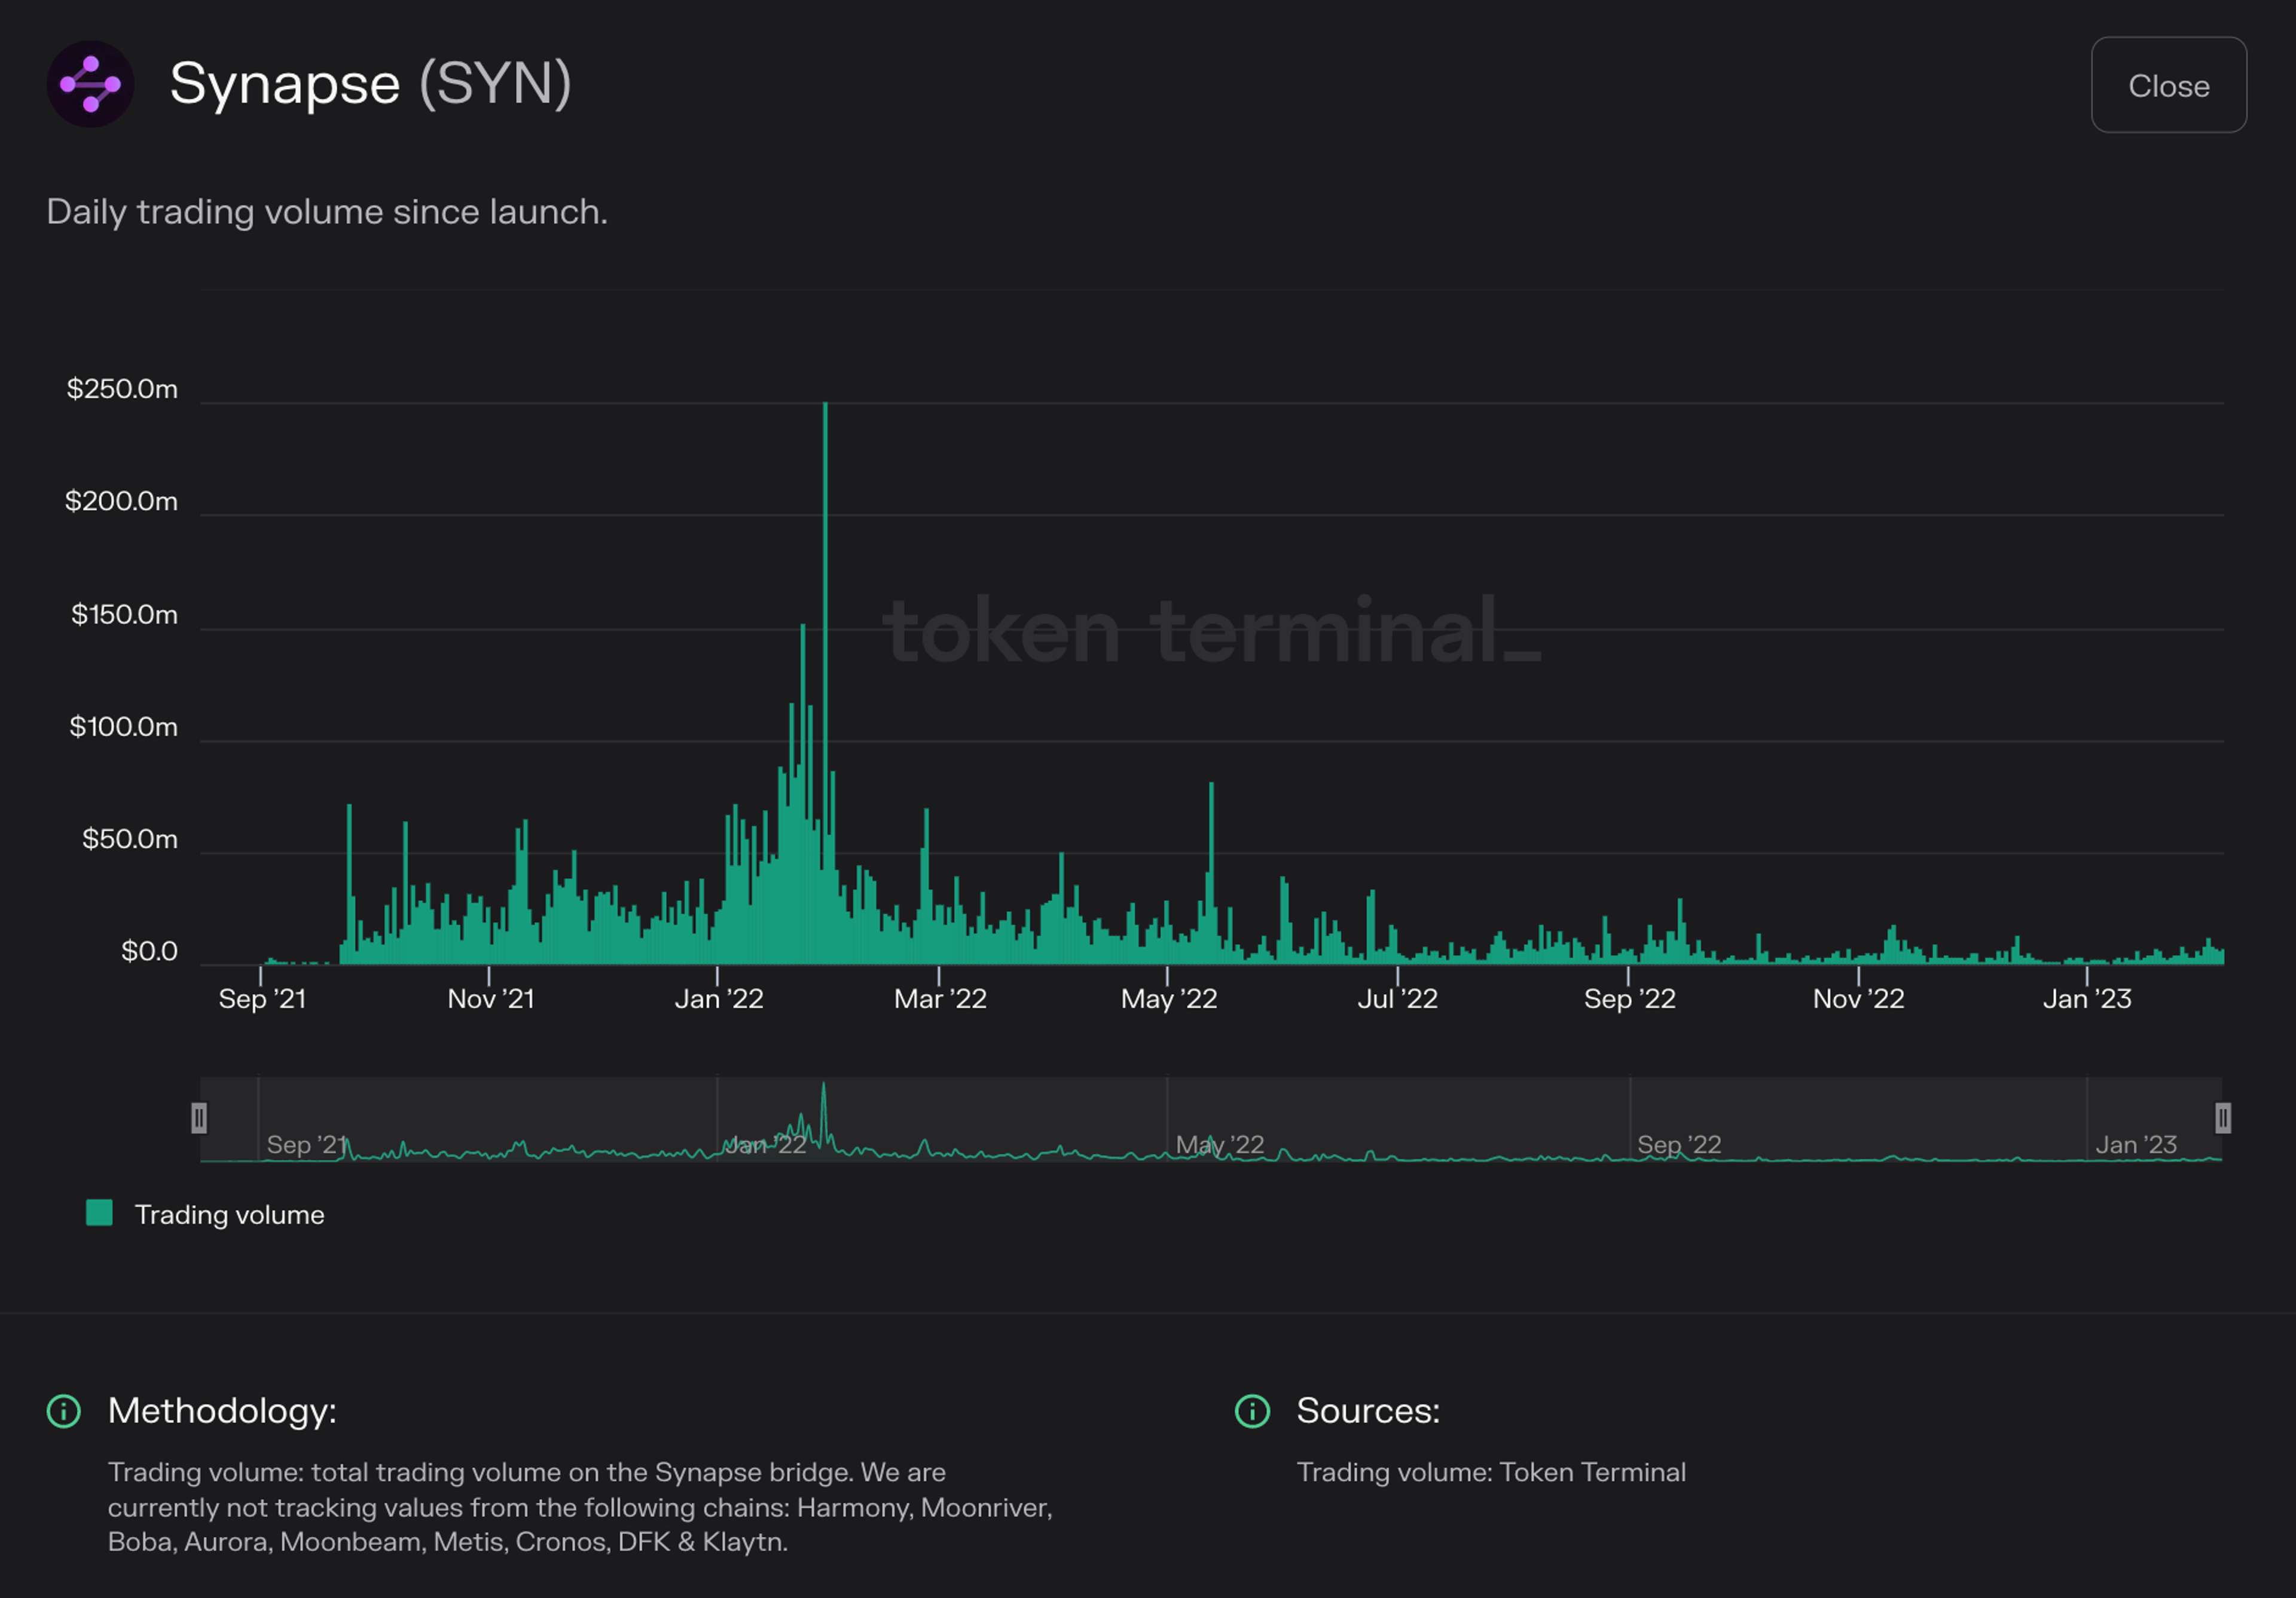 Chart of Synapse trading volume